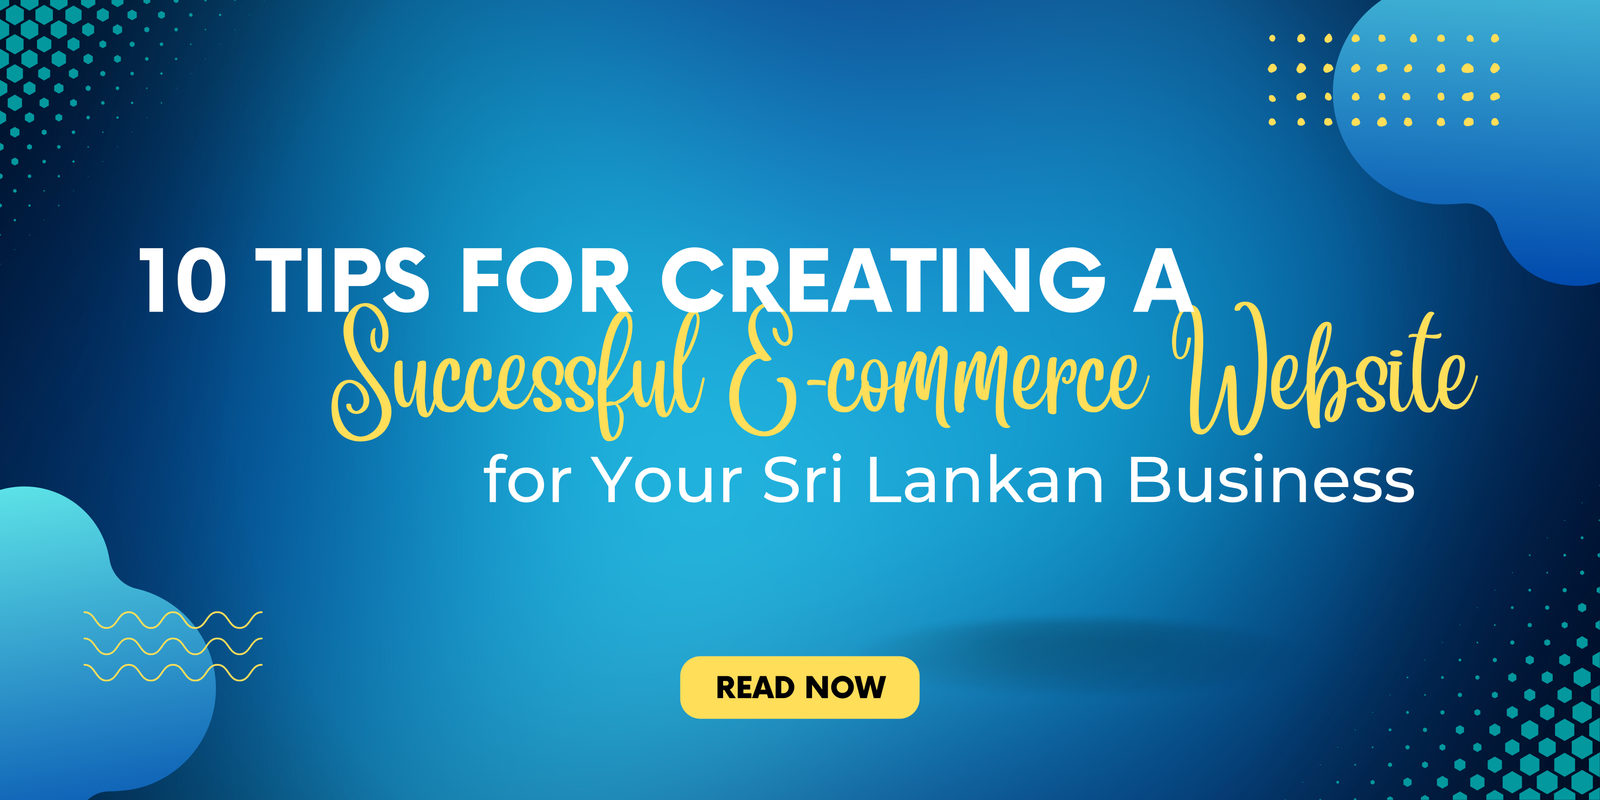 10 Tips for Creating a Successful E-commerce Website for Your Sri Lankan Business